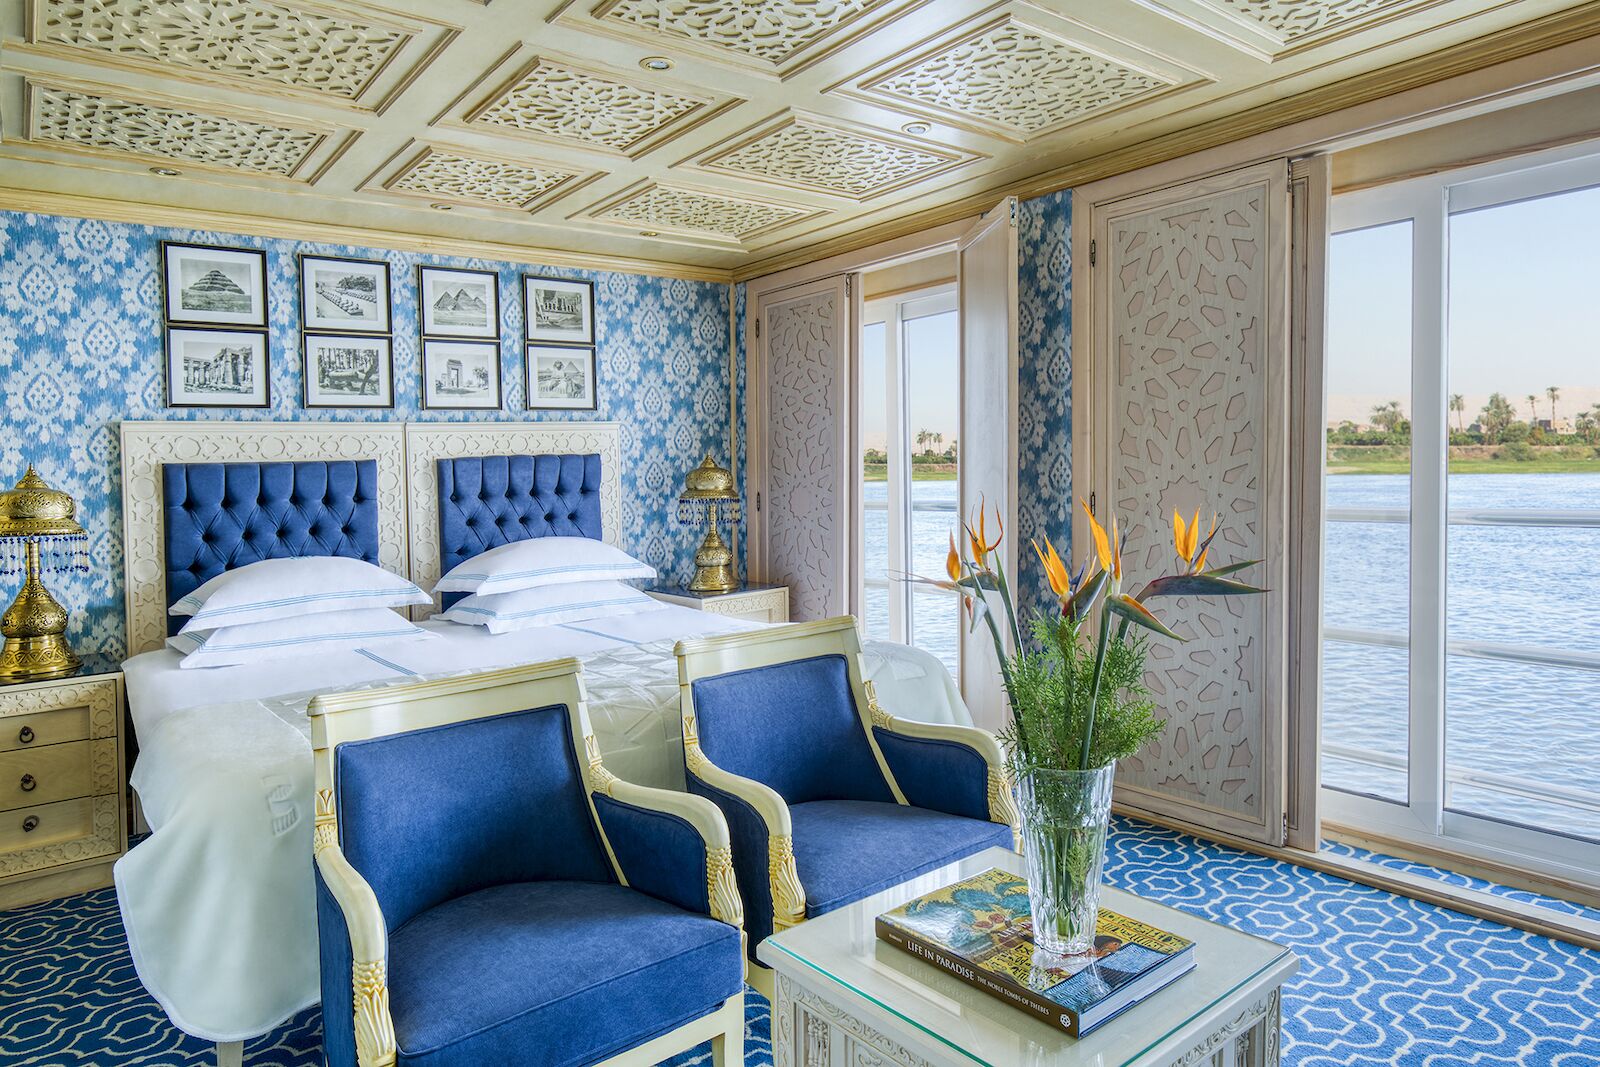 A suite in the S.S.Sphinx, a luxurious ship for an Egyptian river cruise on the Nile